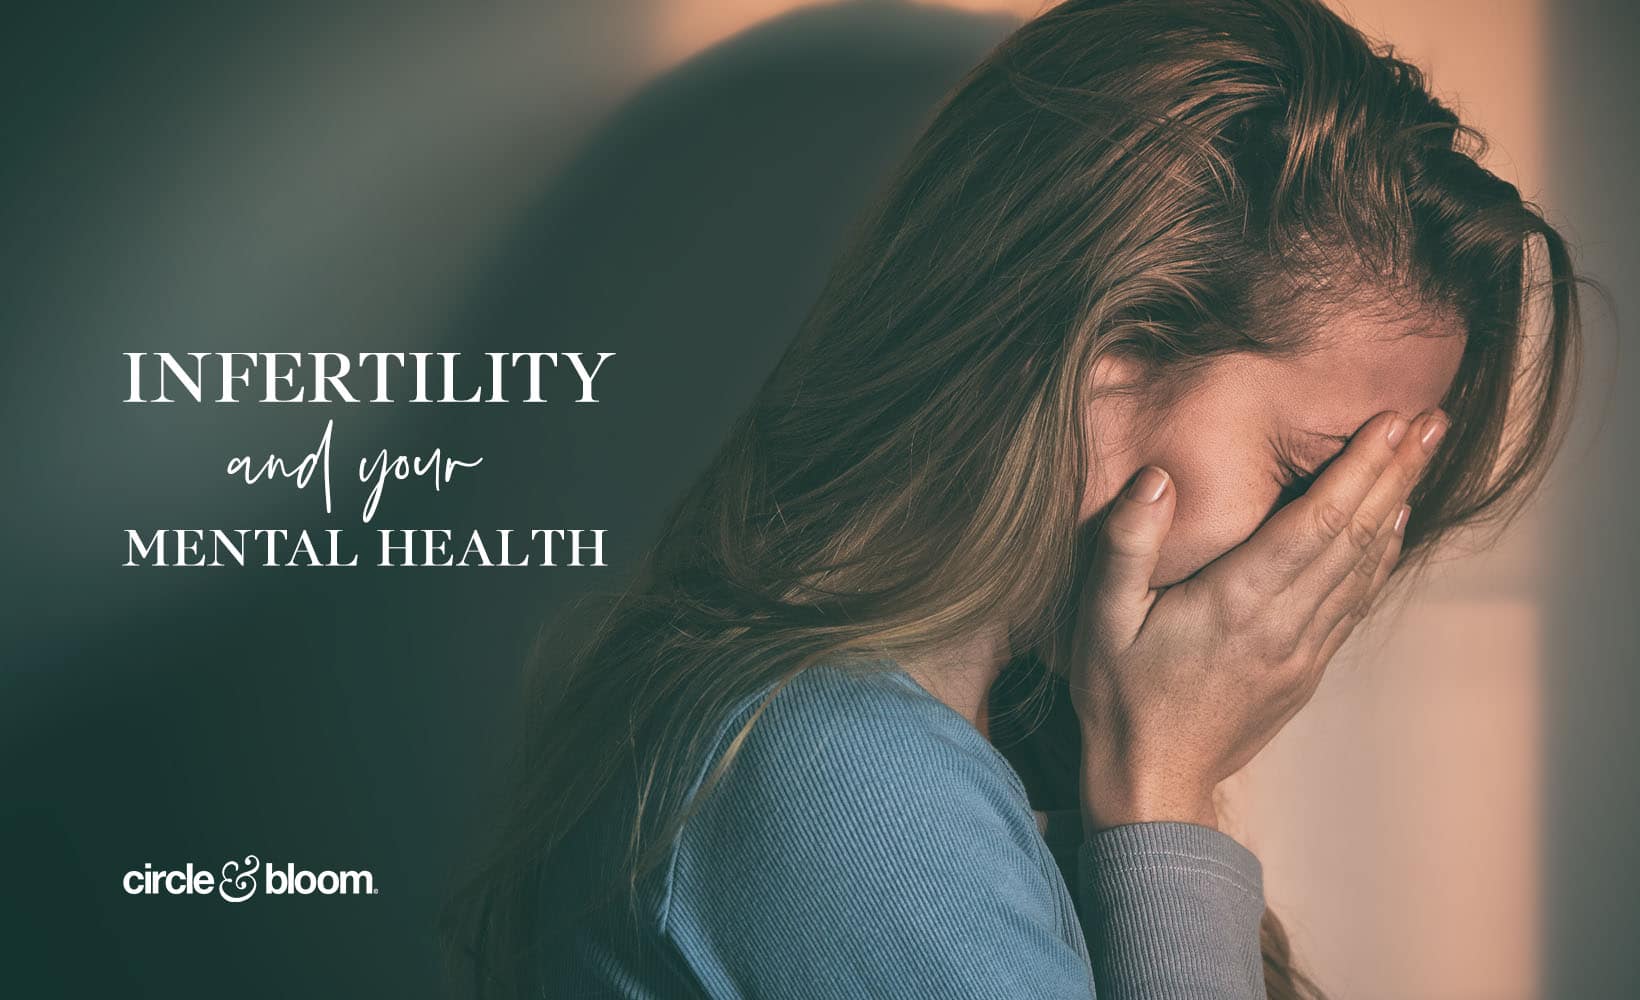 Infertility and Women’s Health